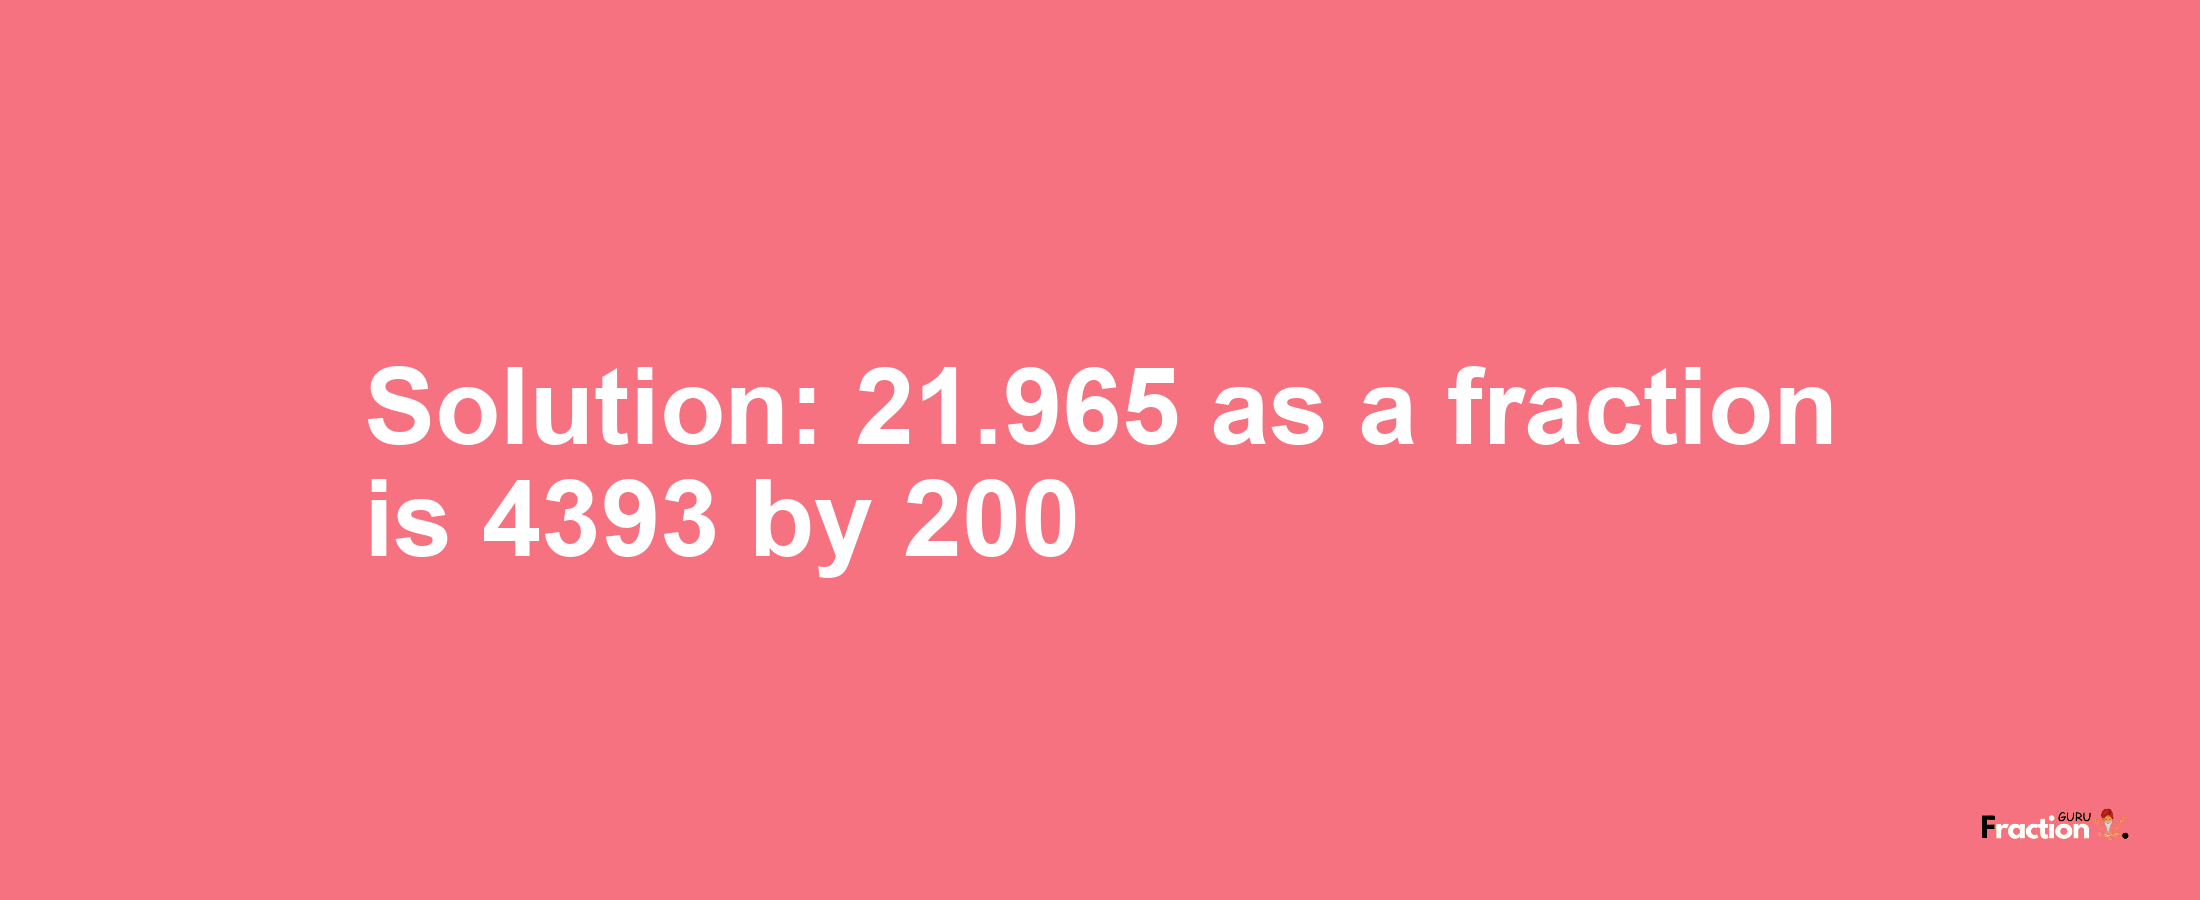 Solution:21.965 as a fraction is 4393/200